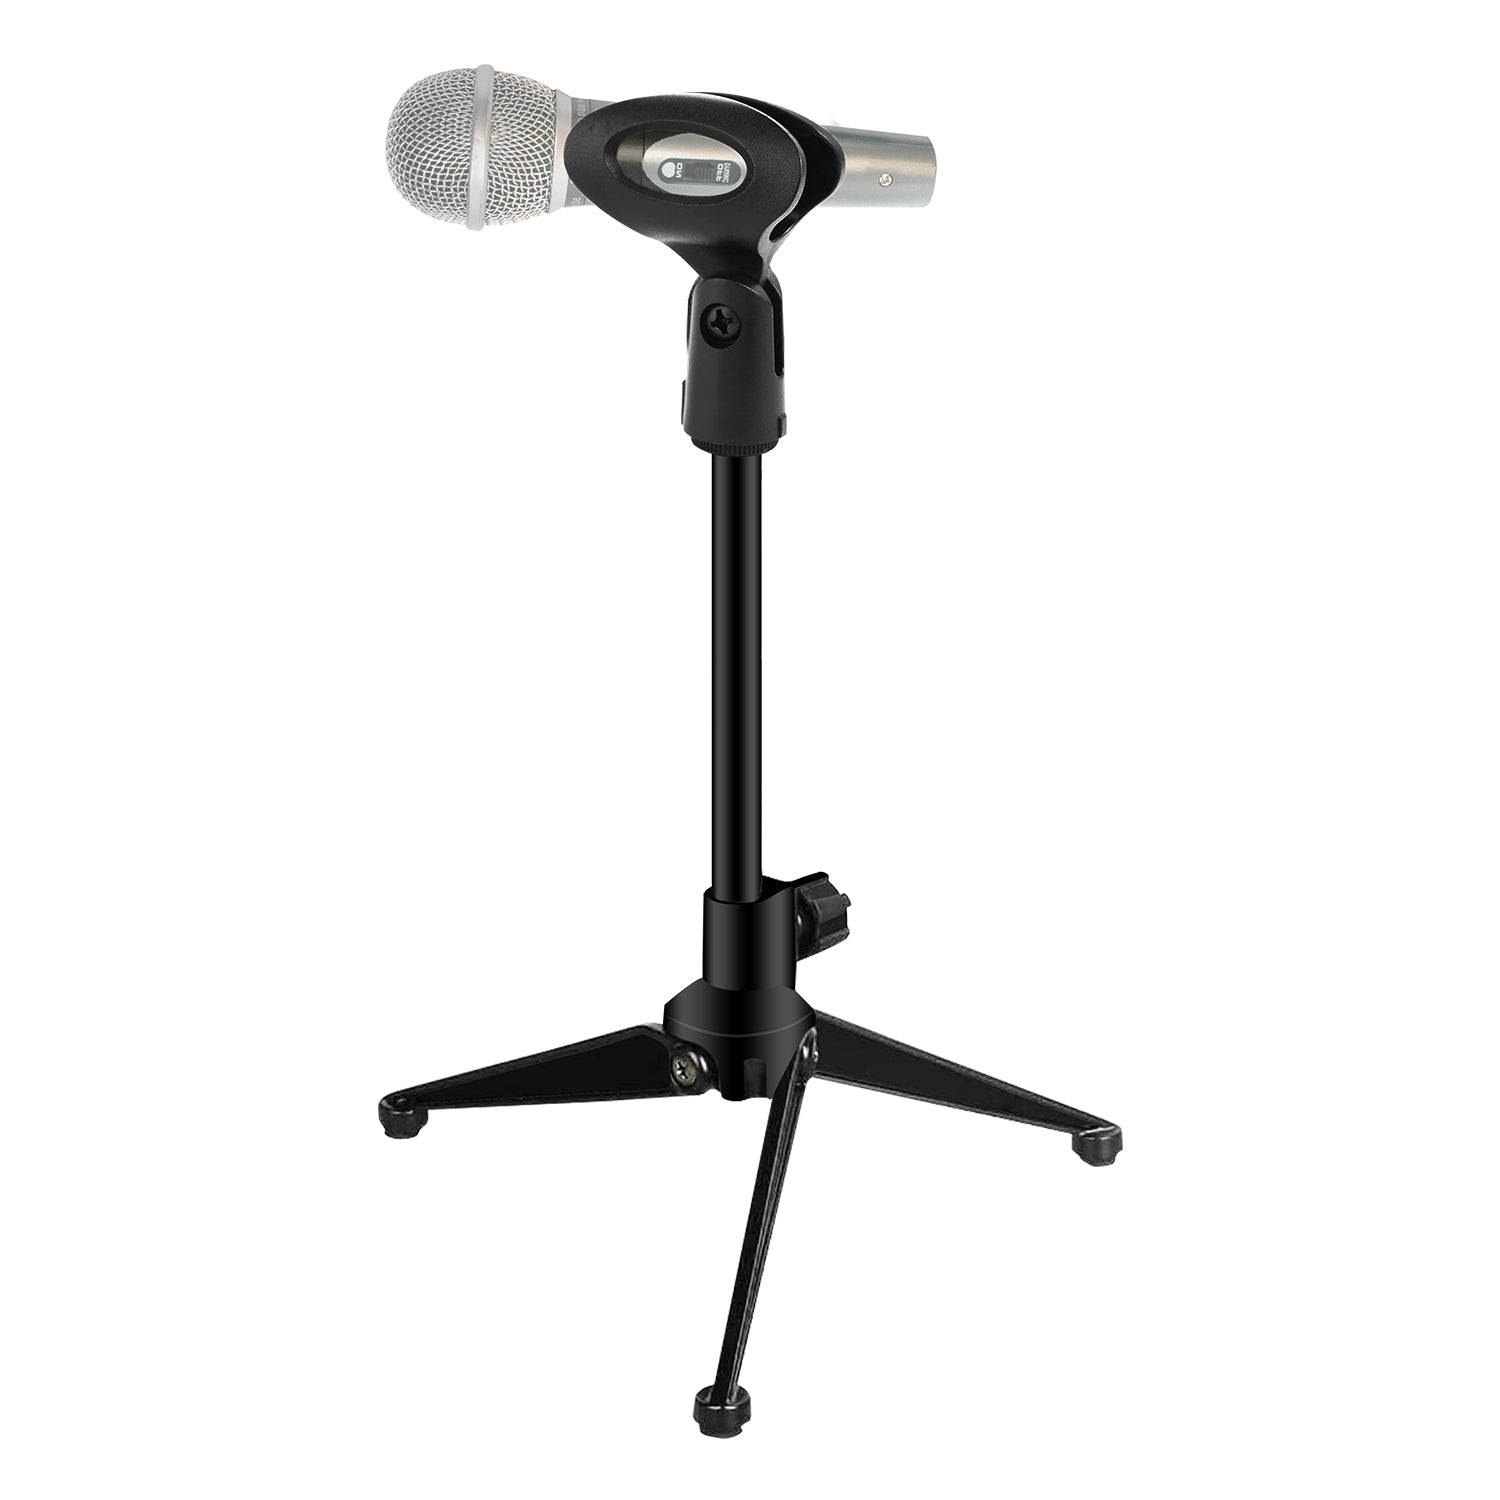 5 Core Universal Small Desktop Microphone Stand 1 Piece Black Adjustable Tabletop Mic Stand For Dynamic Wired Microphone Like Samson Q2U Shure SM58 SM57 PGA48 PGA58 - MS MINI TRI BLK